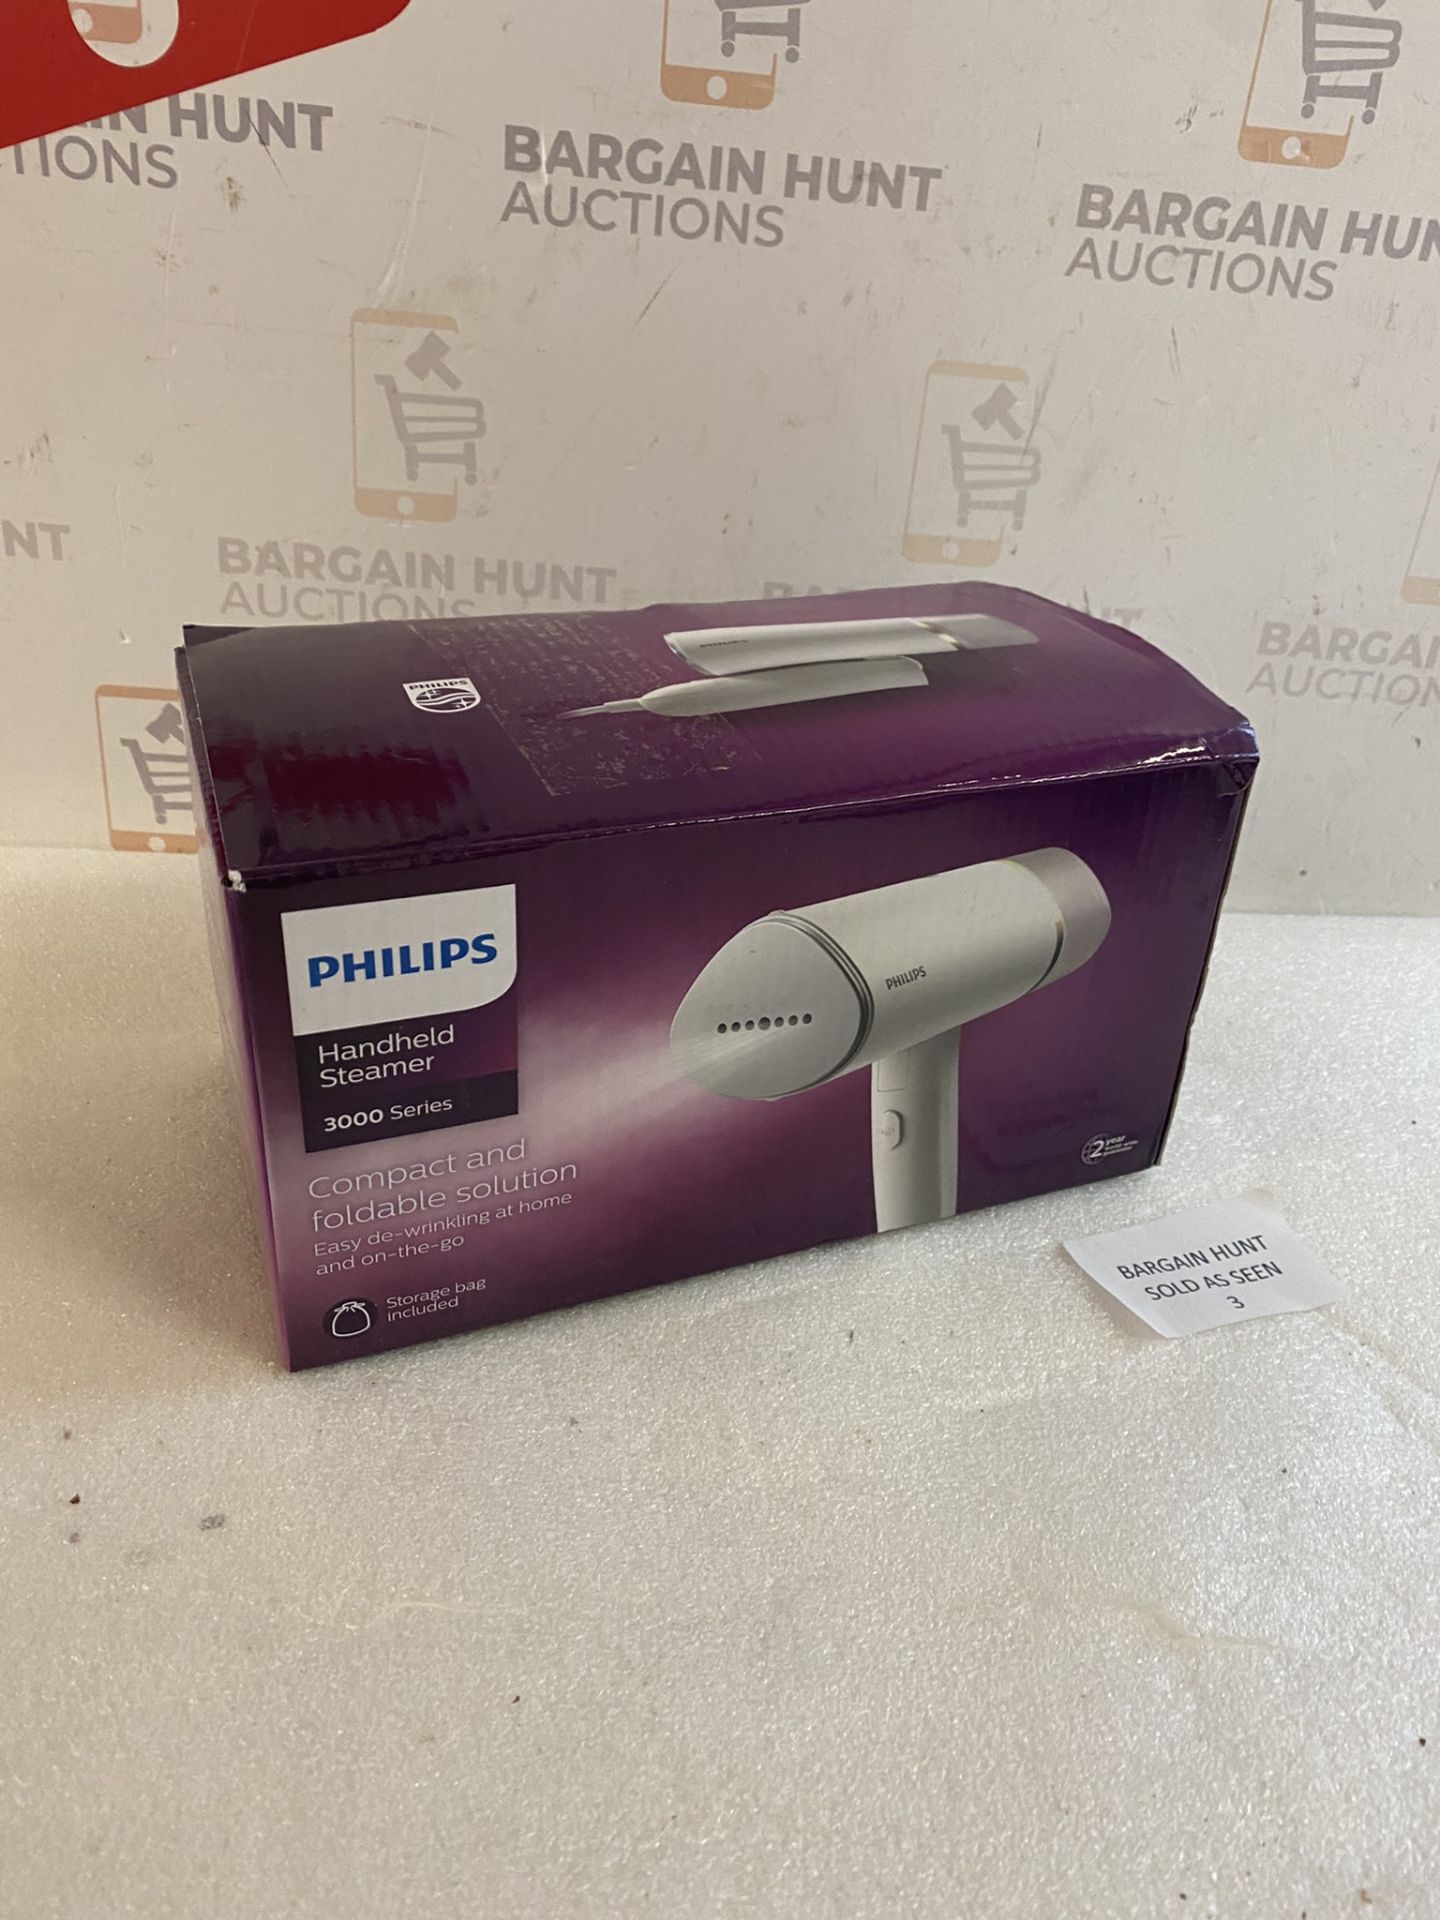 Philips Handheld Steamer 3000 Series Compact and Foldable RRP £49.99 - Image 2 of 2